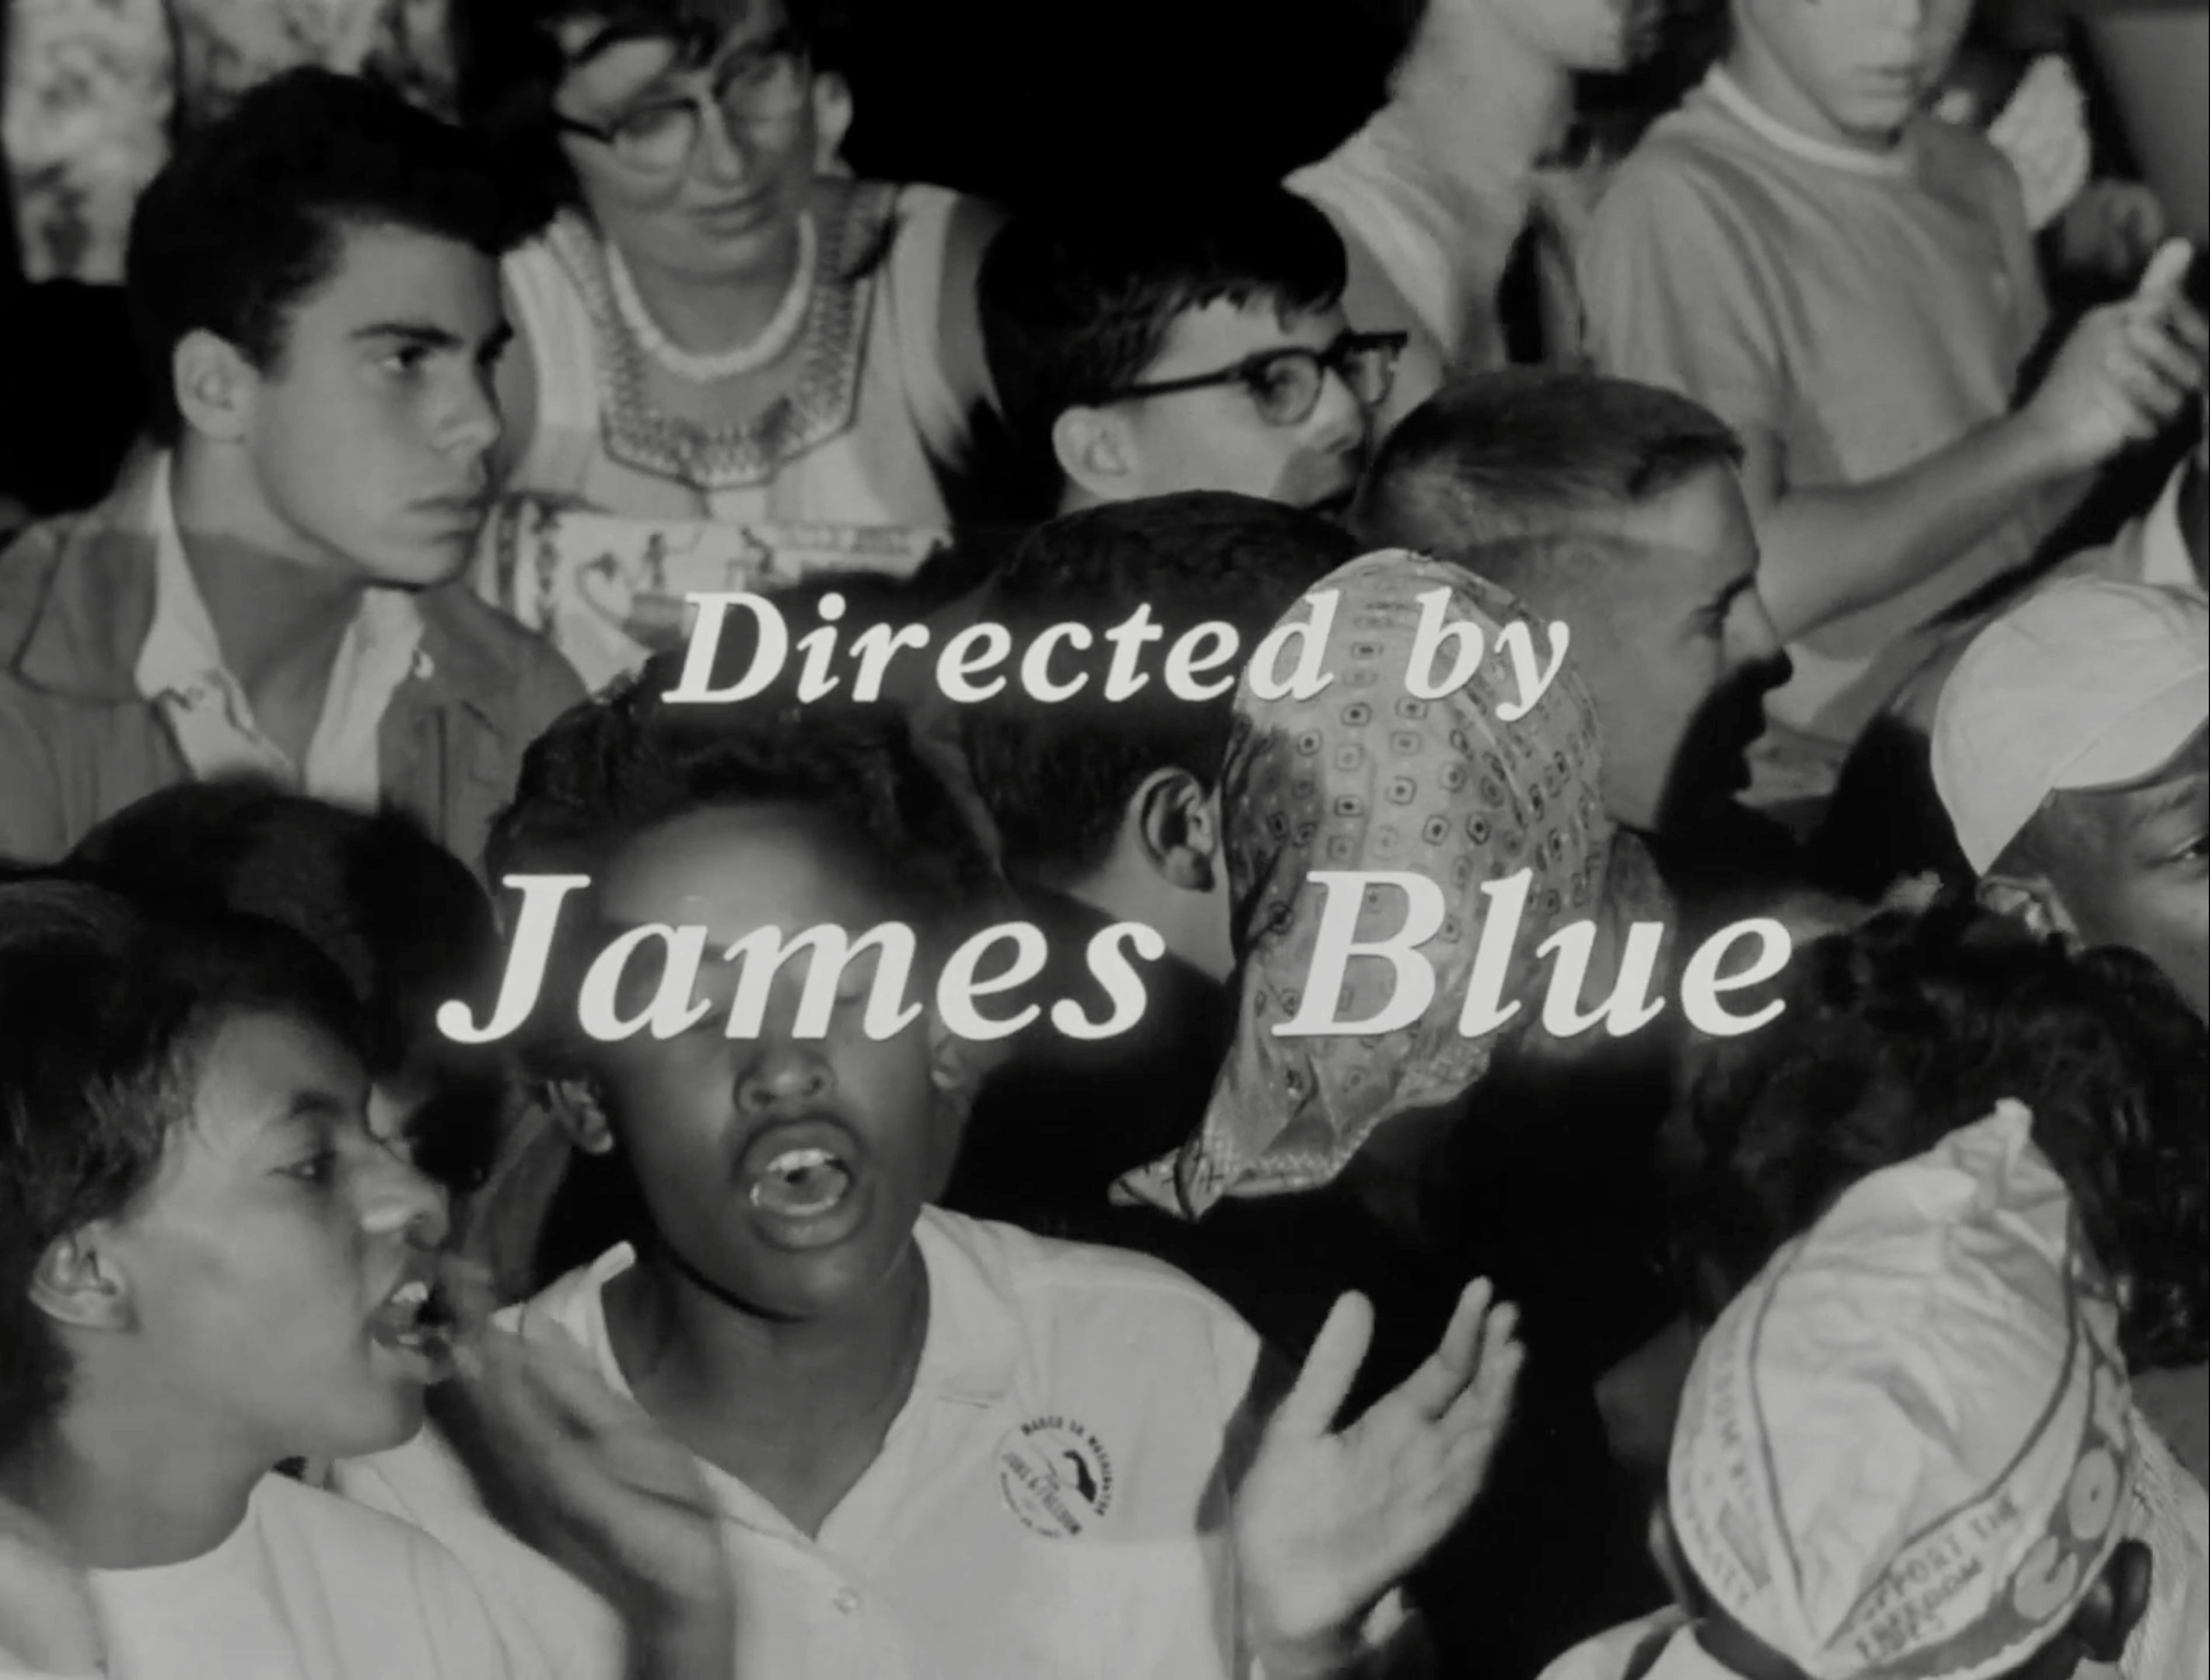 A film still showing people singing with the title "Directed by James Blue."